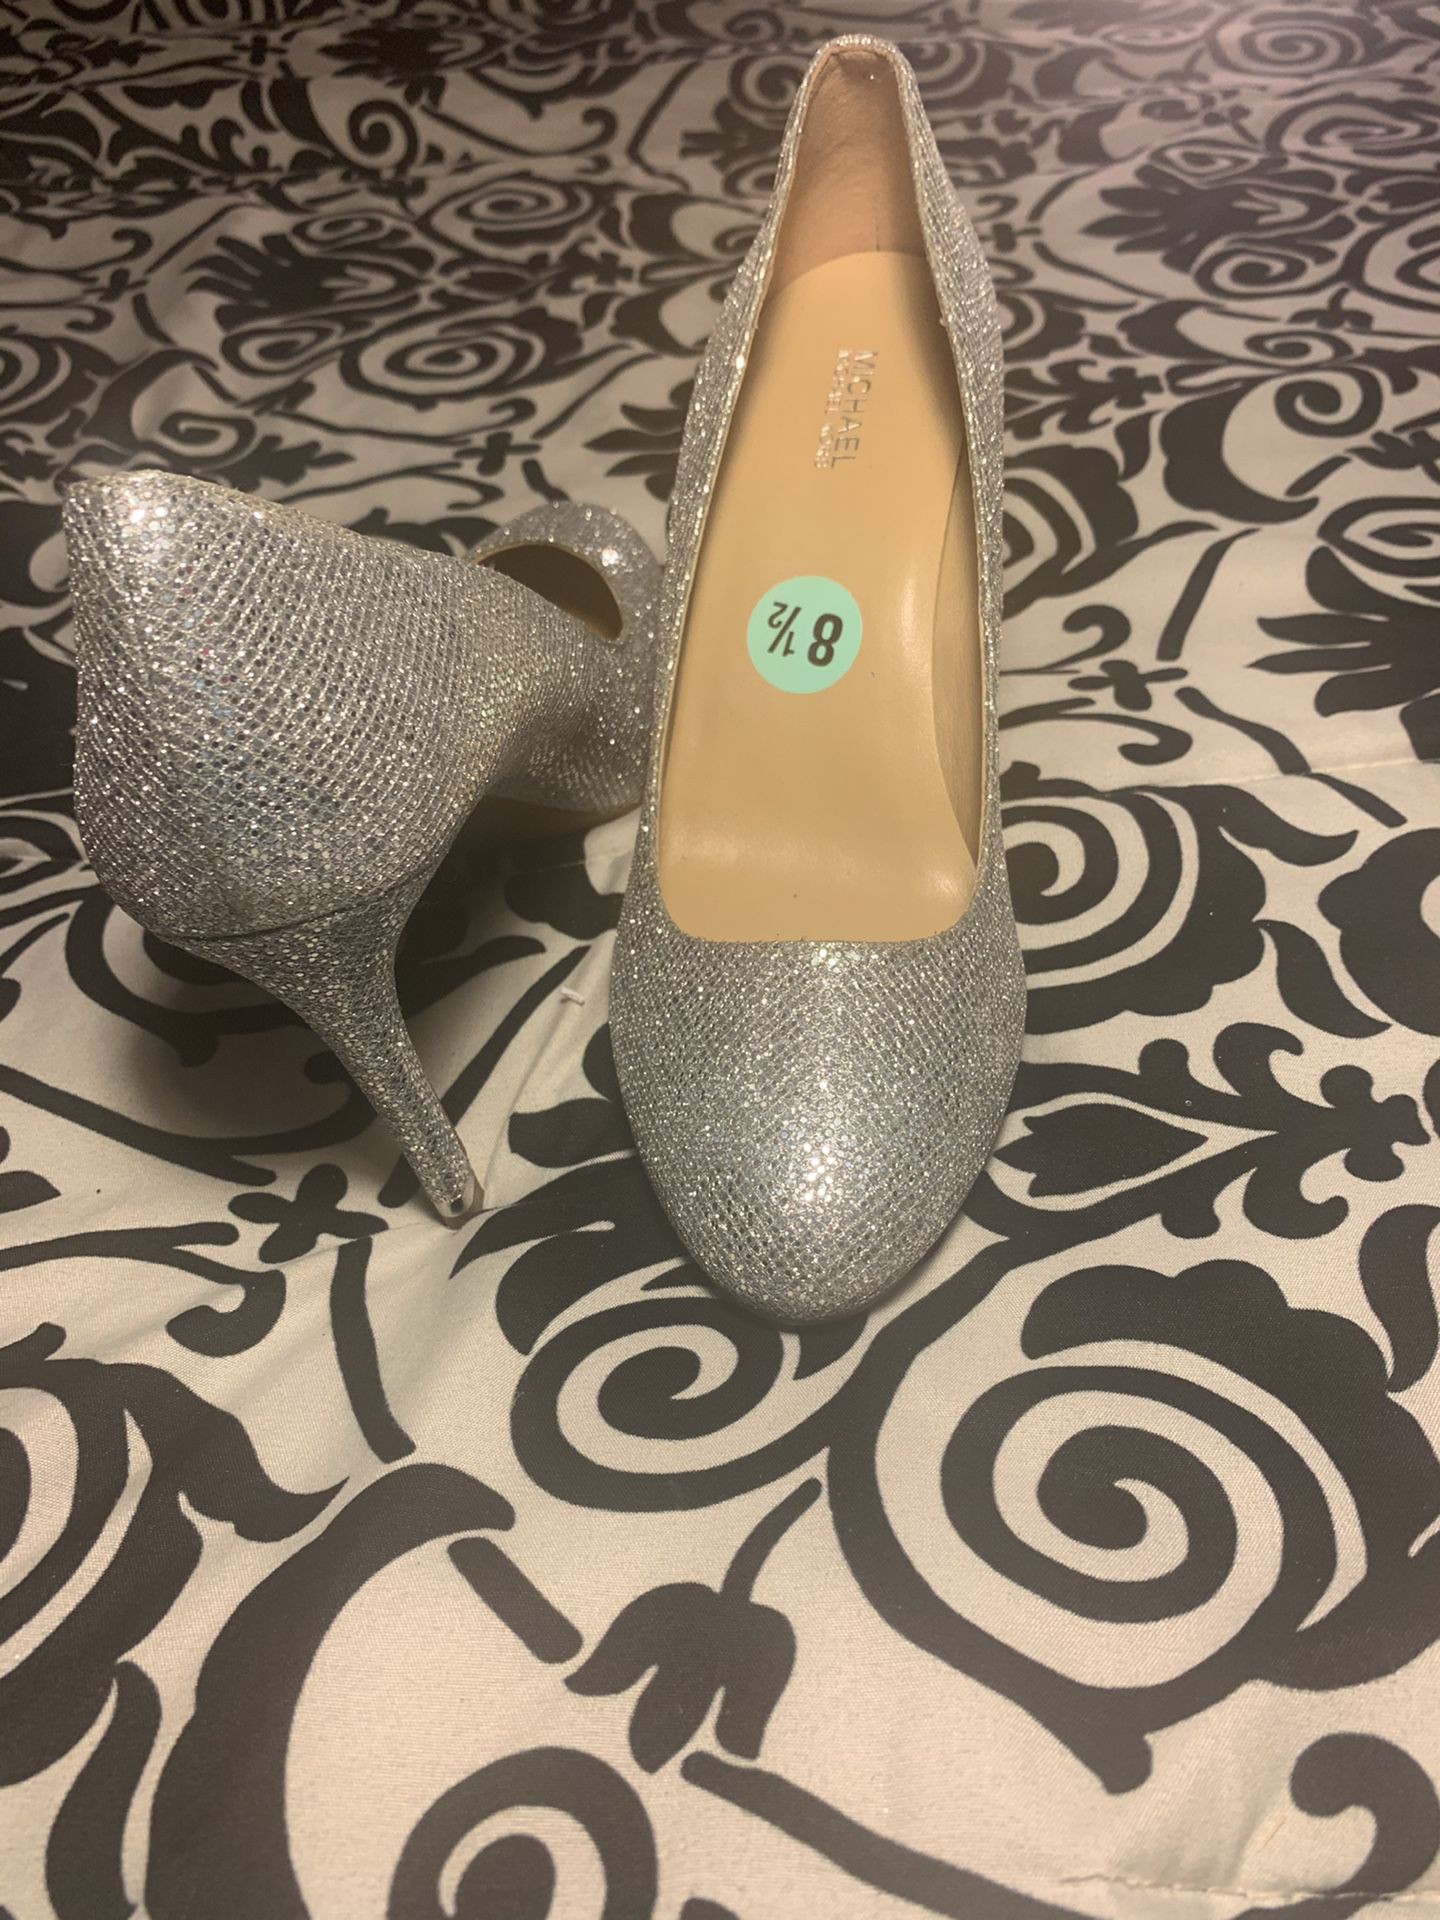 Michael Kors Women’s high heels Size 8.5 Color Silver Pre Own Condition